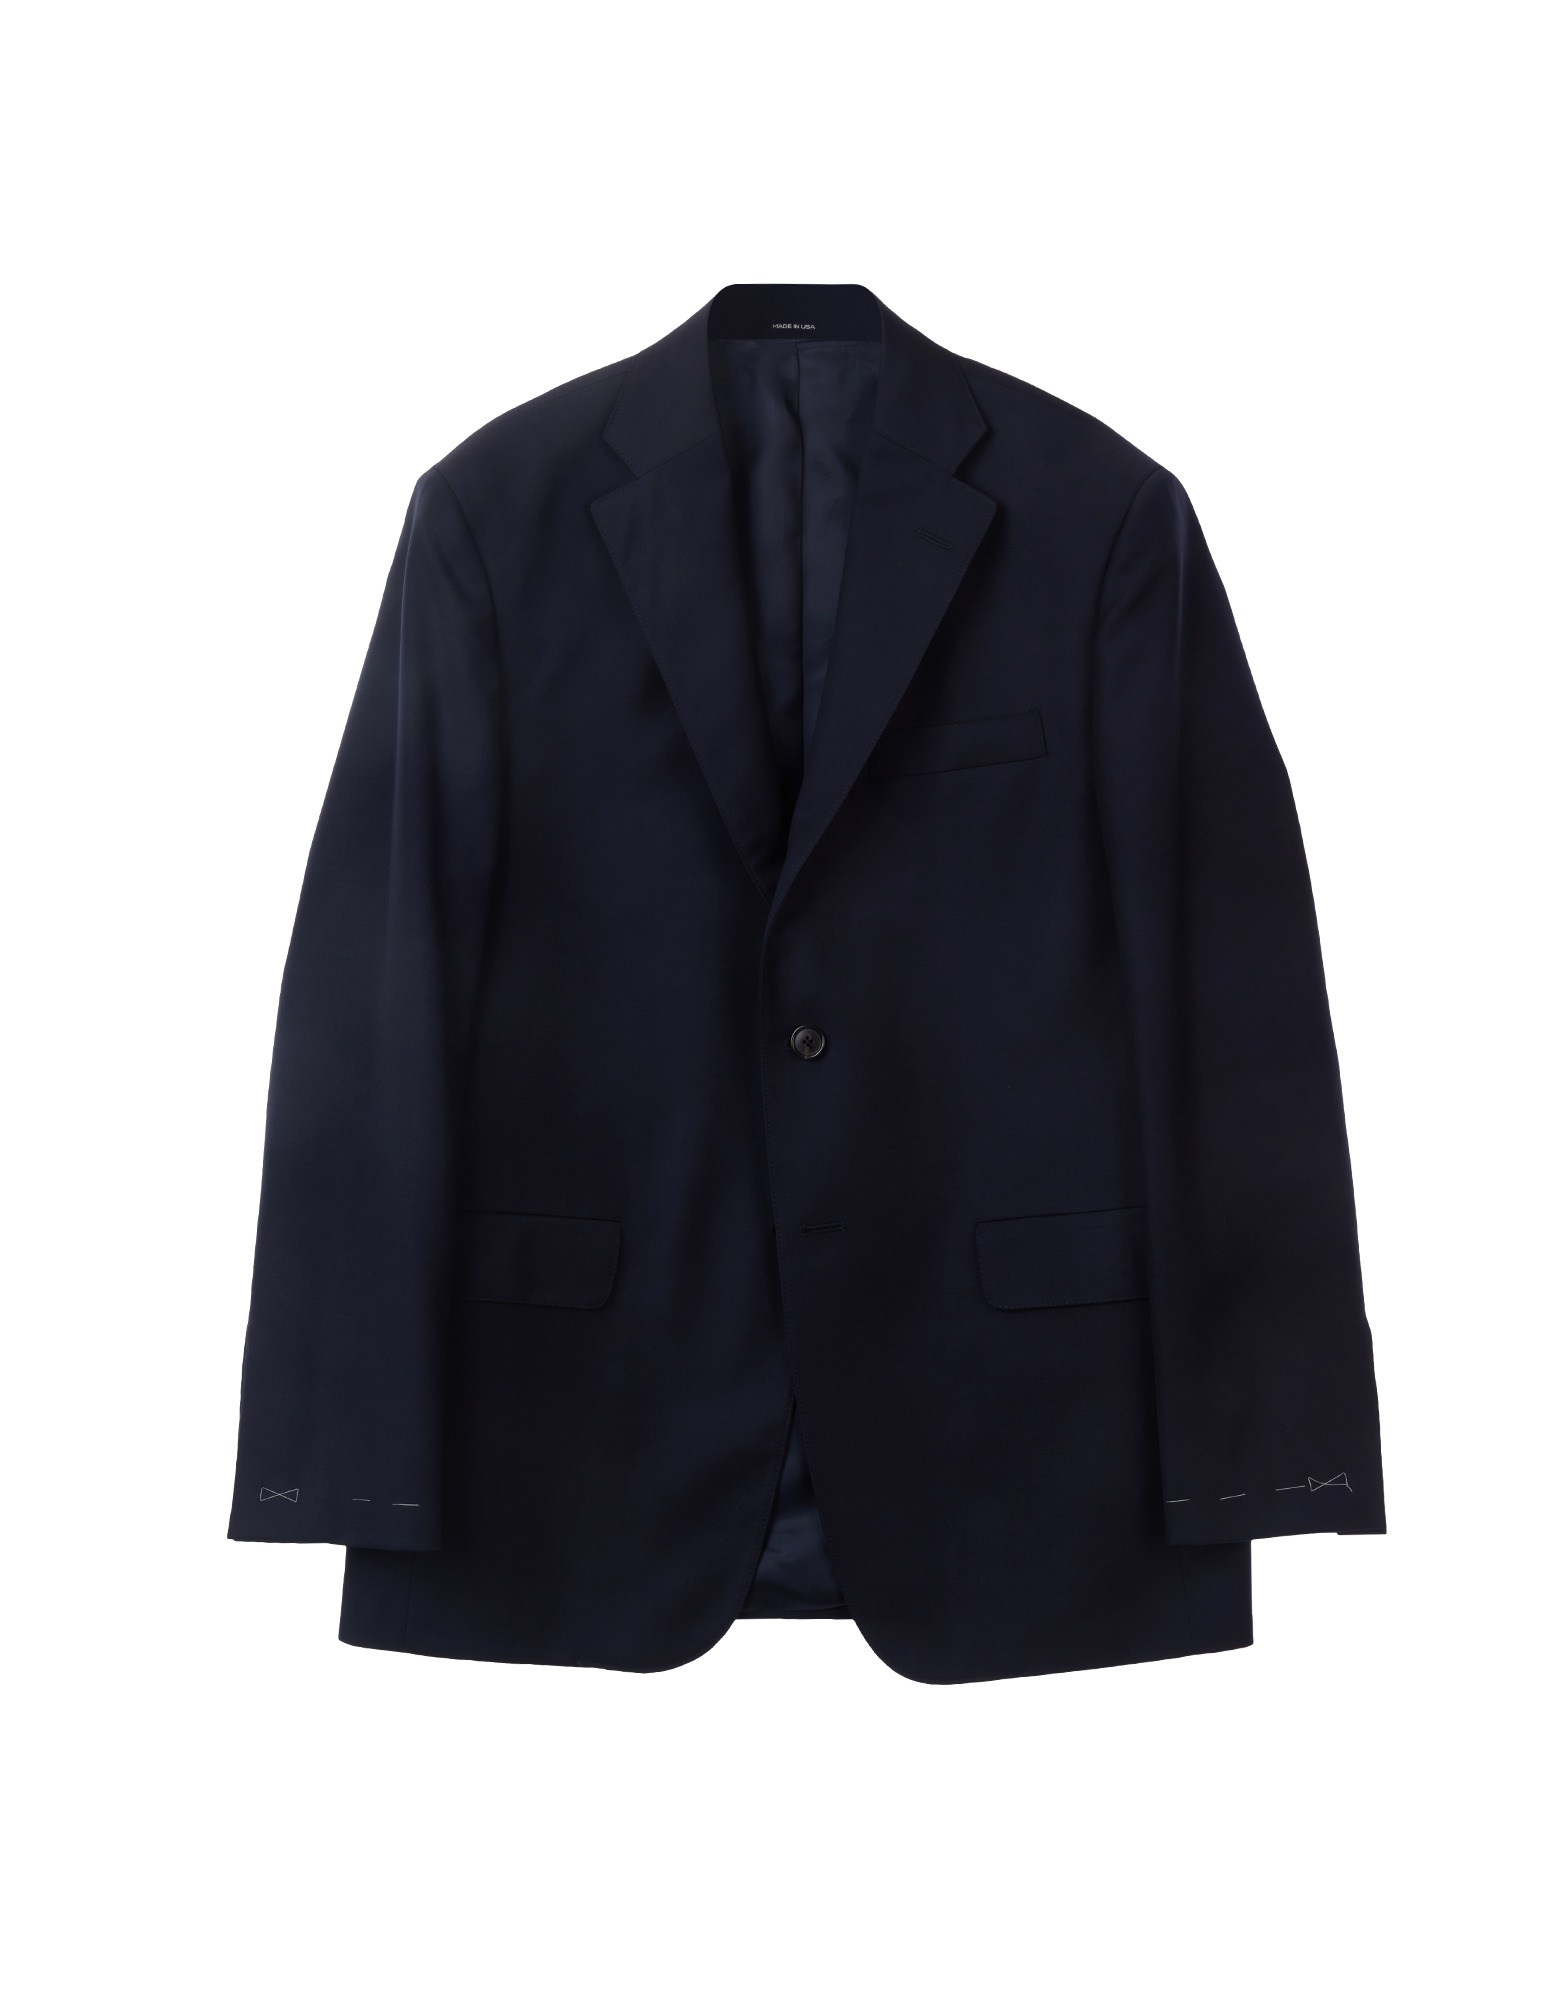 Solid Suit (Navy)